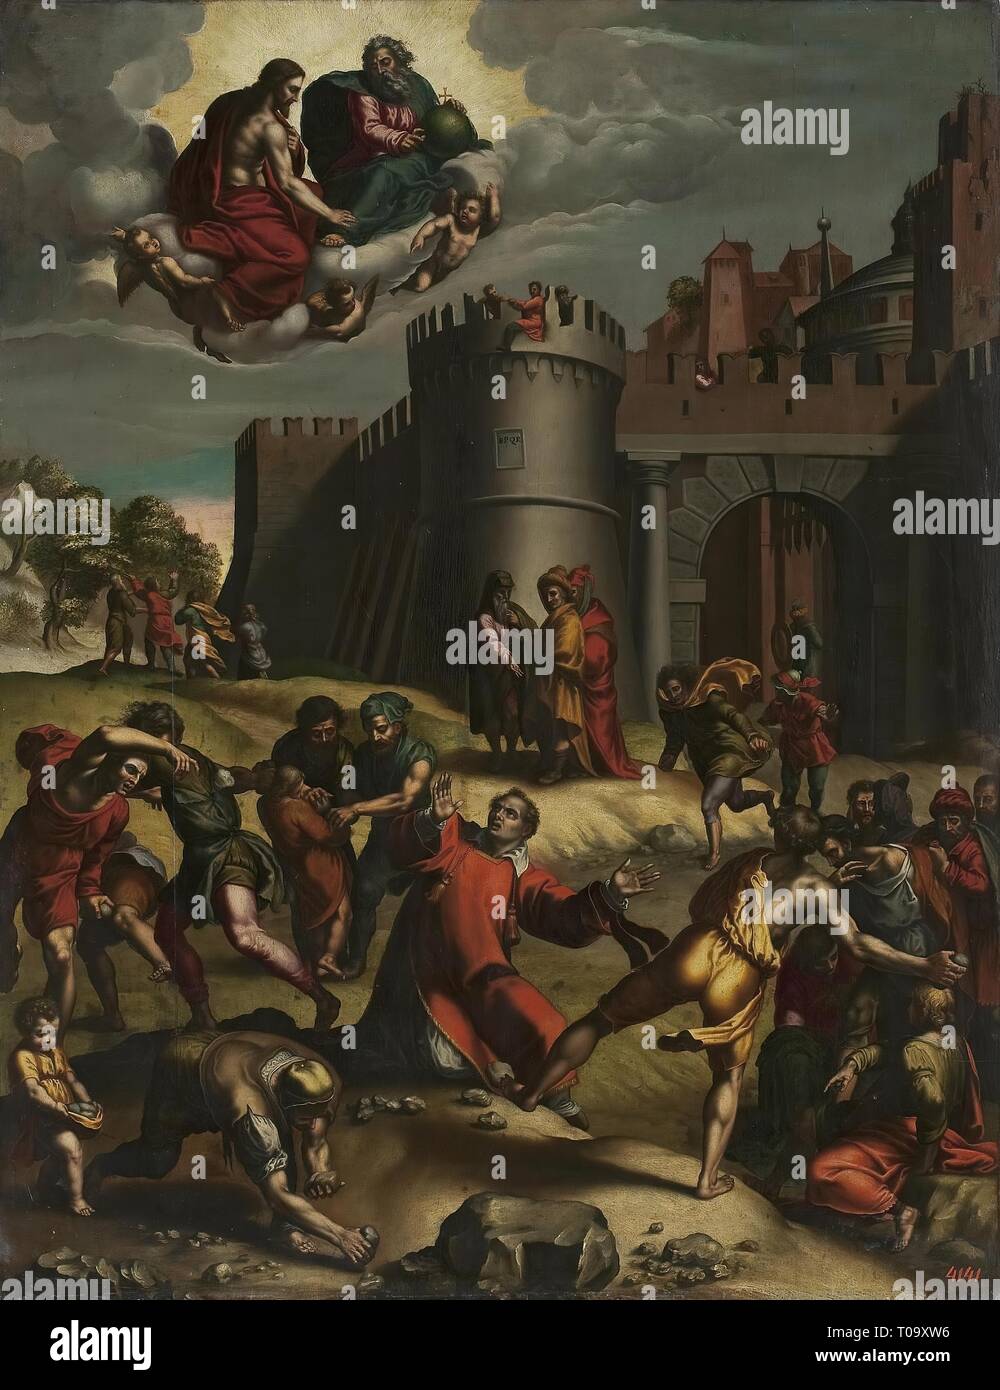 'Martyrdom of St Stephen'. Italy, 16th century. Dimensions: 94x72 cm. Museum: State Hermitage, St. Petersburg. Author: MARCELLO VENUSTI. Stock Photo